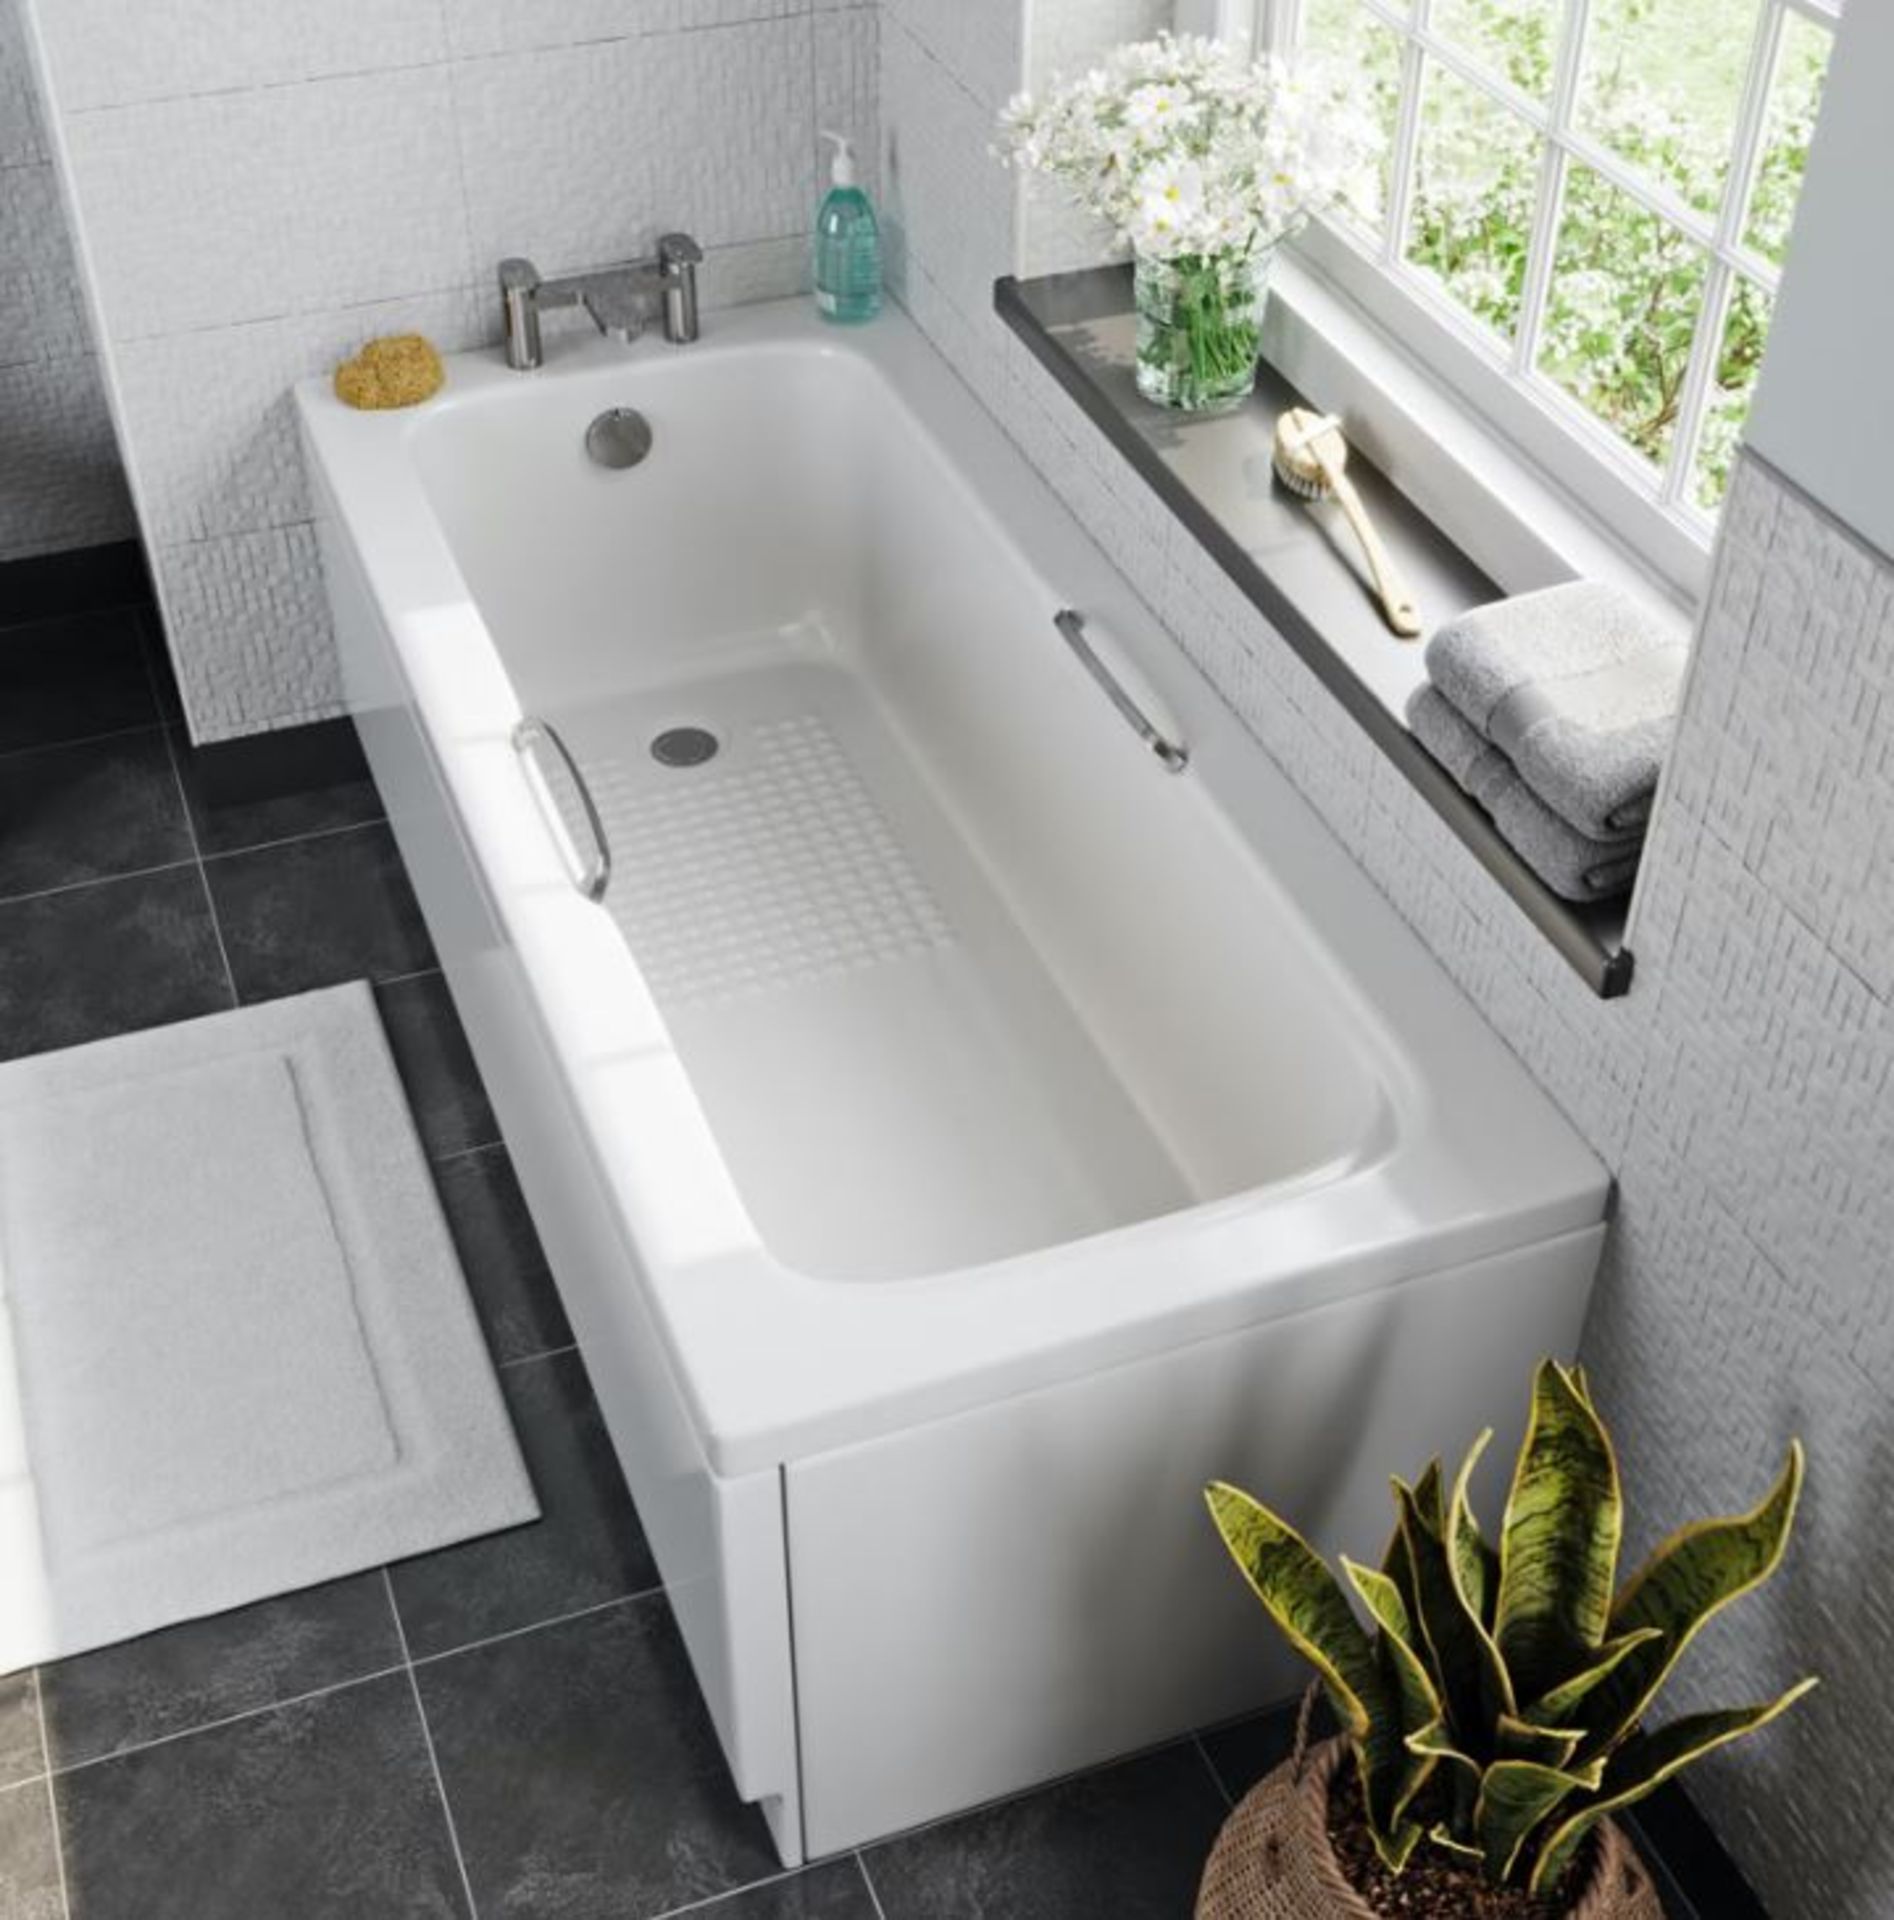 1700 x 700mm Kirk Anti Slip Single Ended Bath Fitted With Chrome Grab Handles. Appears New unused